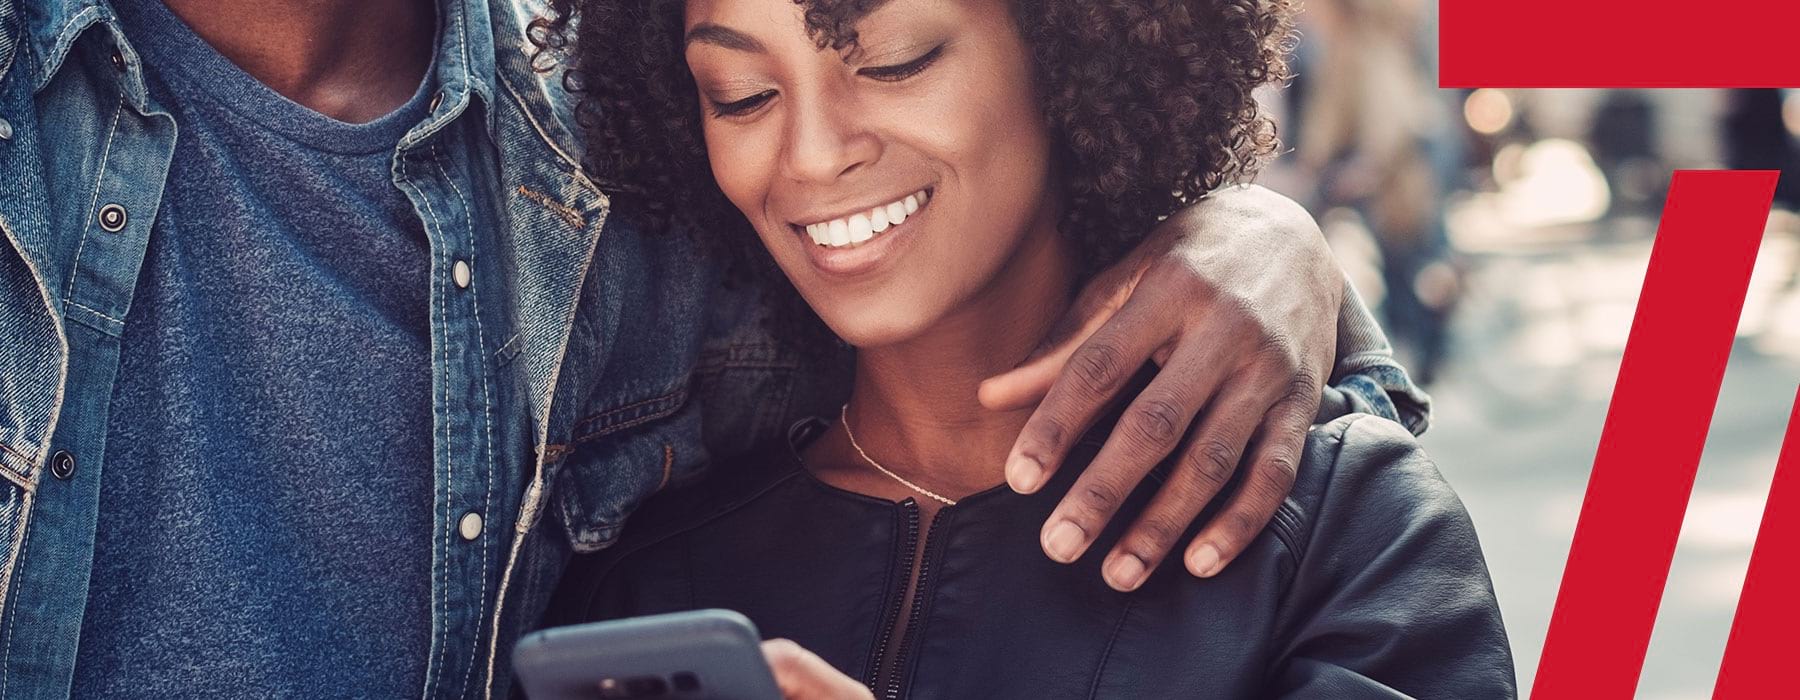 lifestyle image of a woman smiling while looking at her device